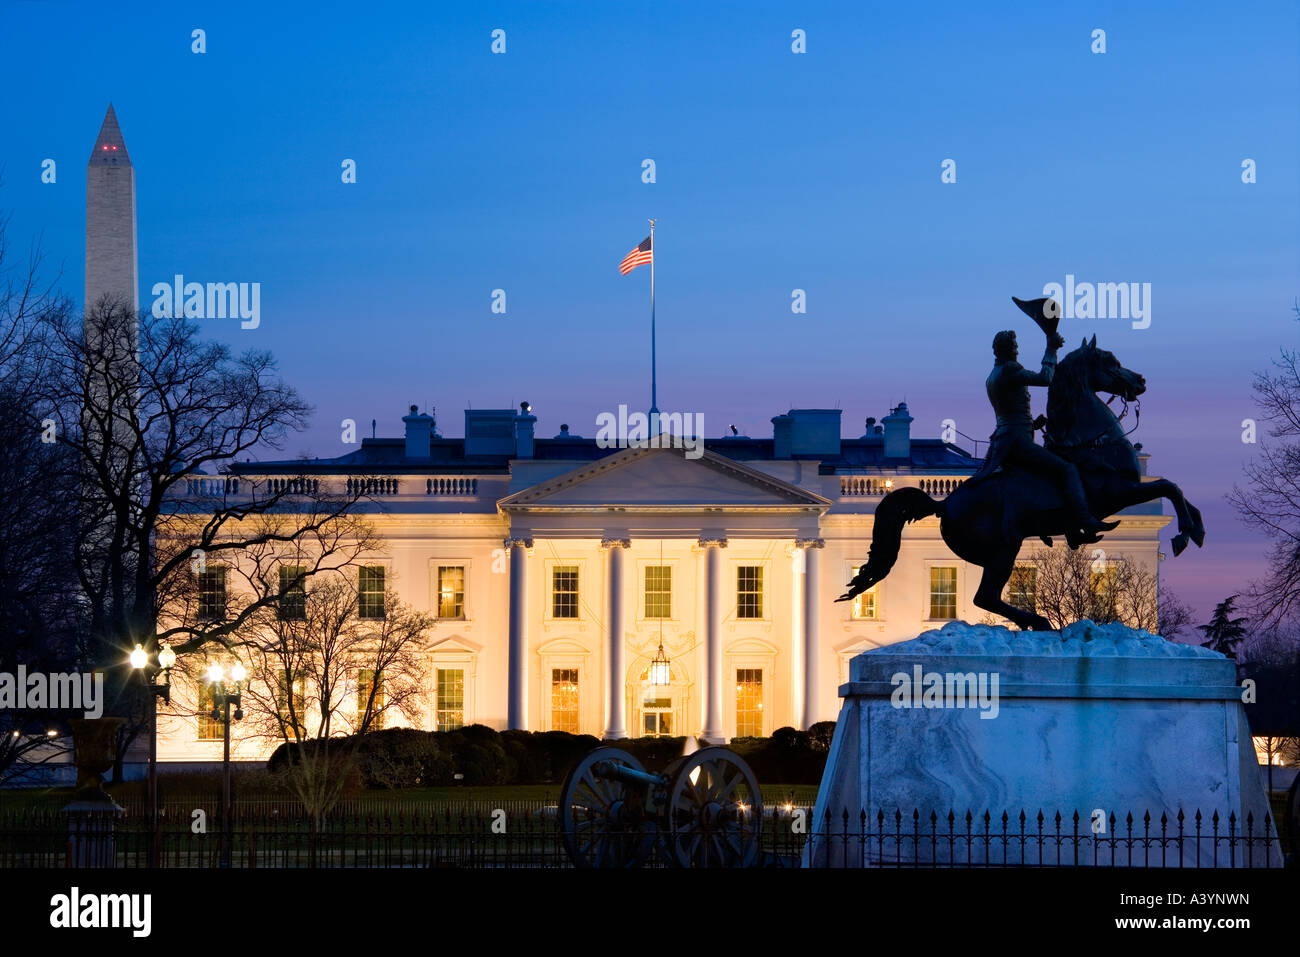 Washington Monument; The White House and the equestrian statue of Andrew Jackson in Lafayette Square, Washington DC US at night Stock Photo